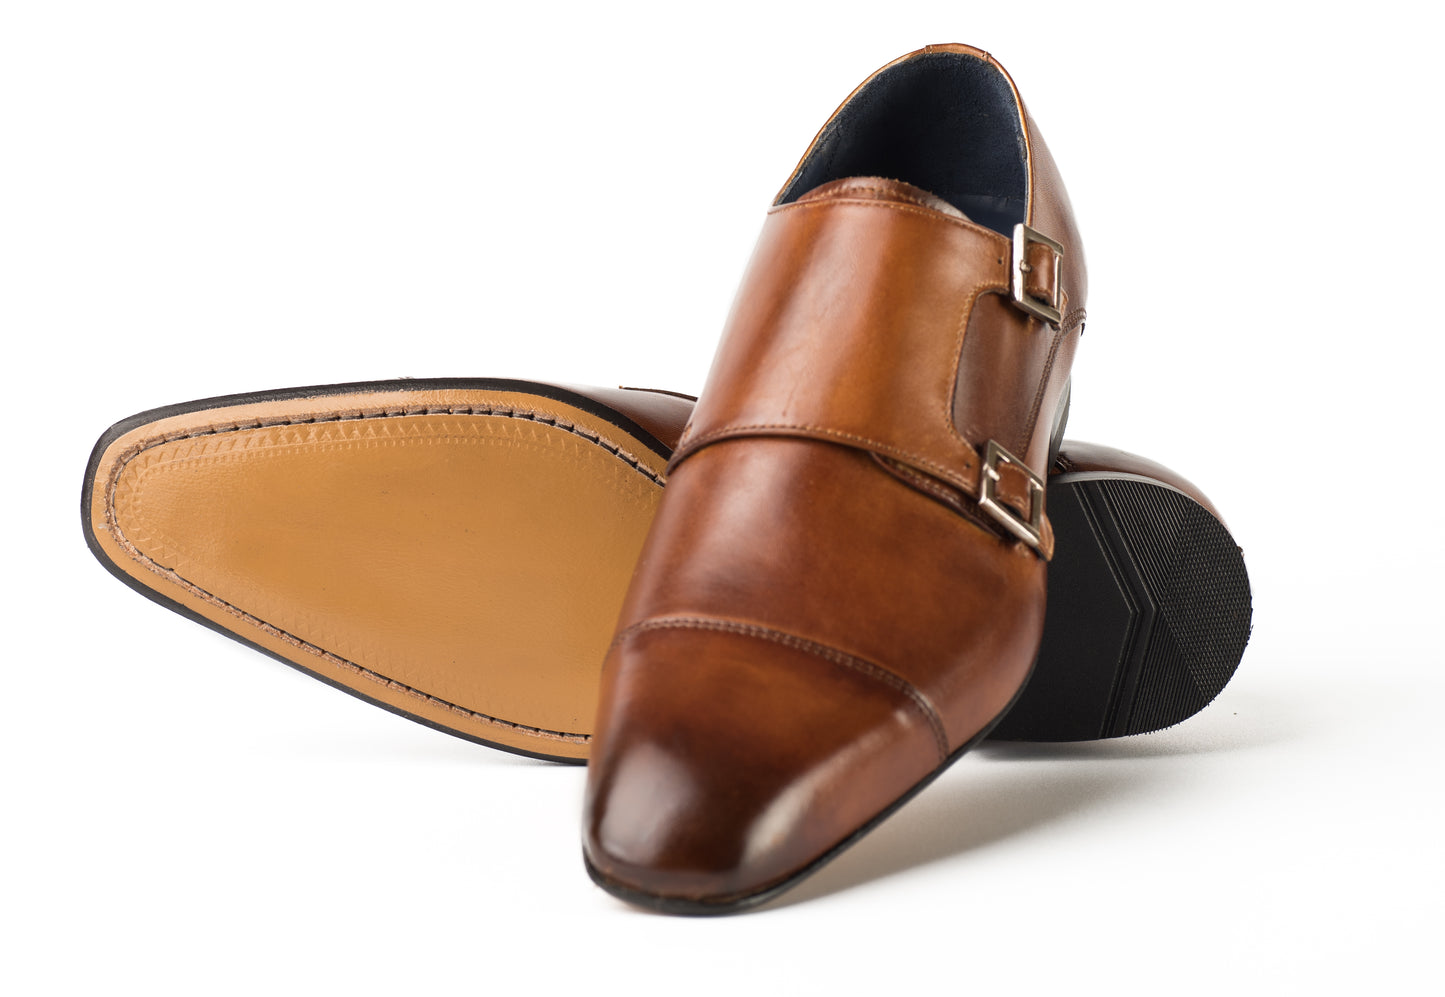 Brown Double Monk Straps Shoes